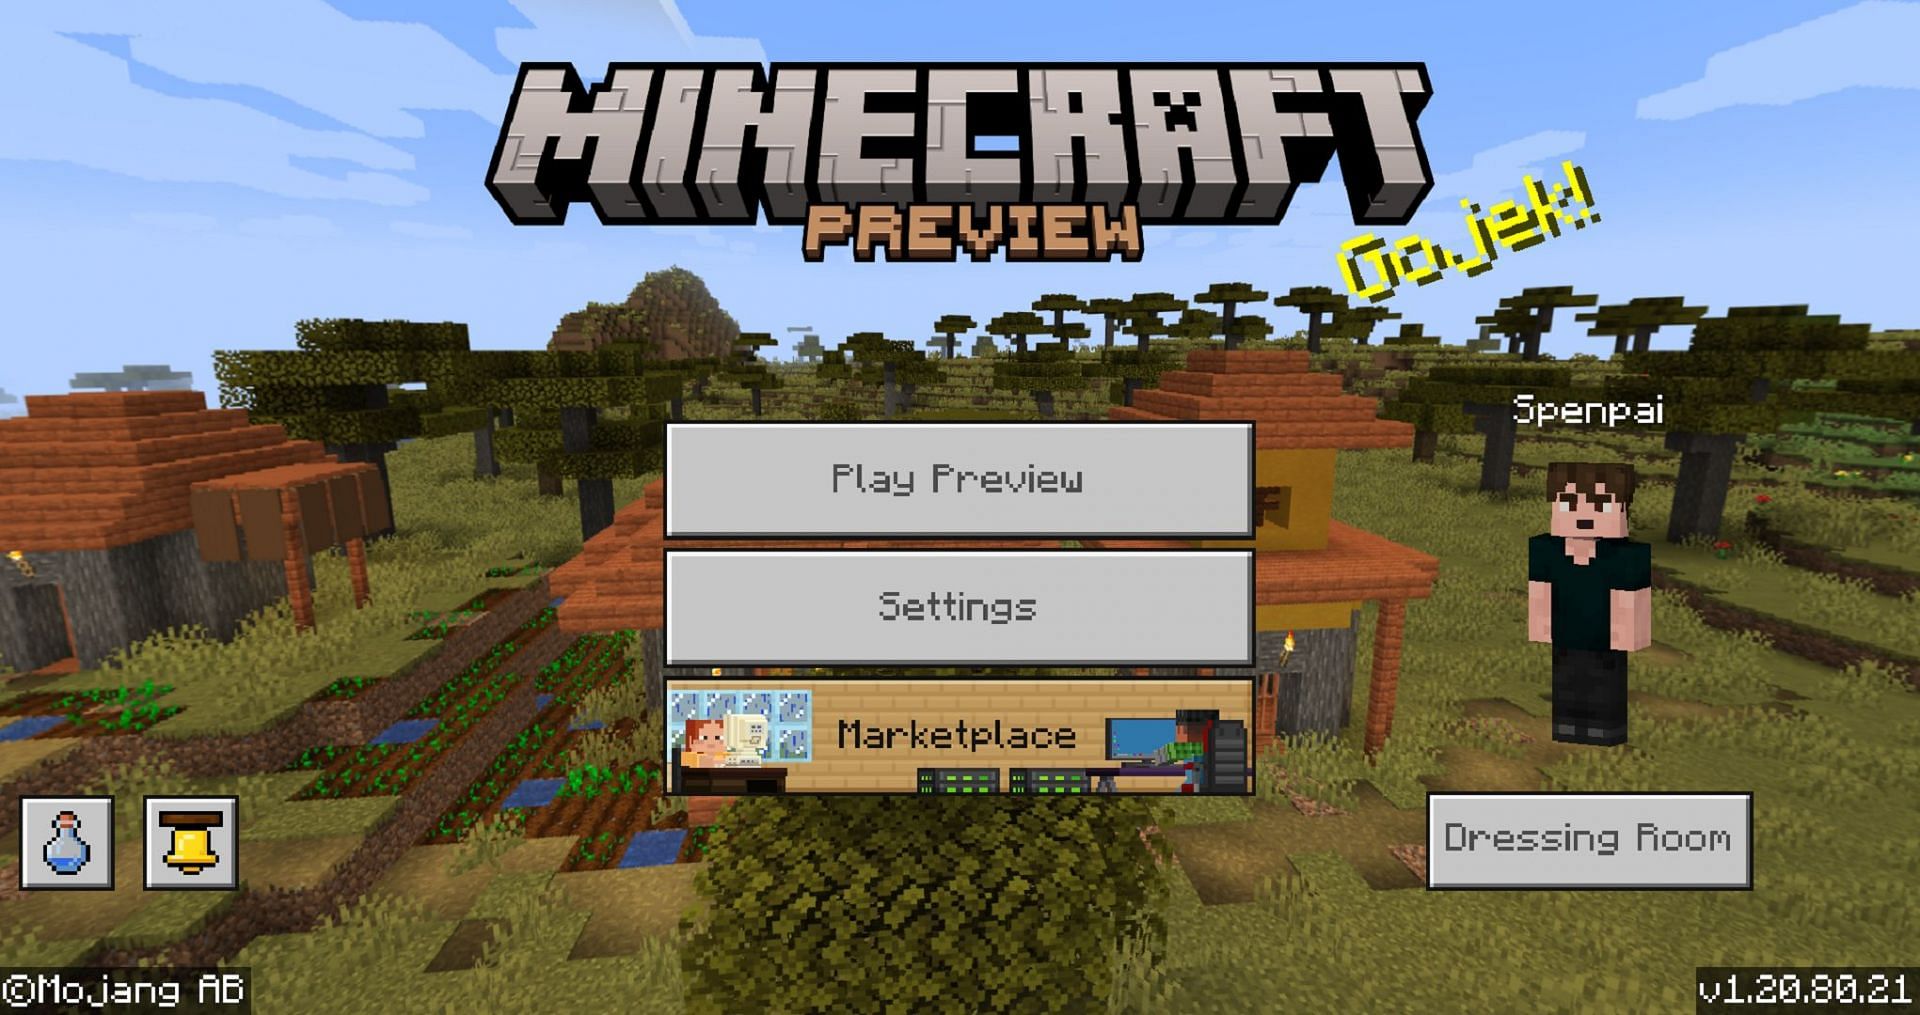 How to download Minecraft Bedrock 1.20.80.21 beta and preview